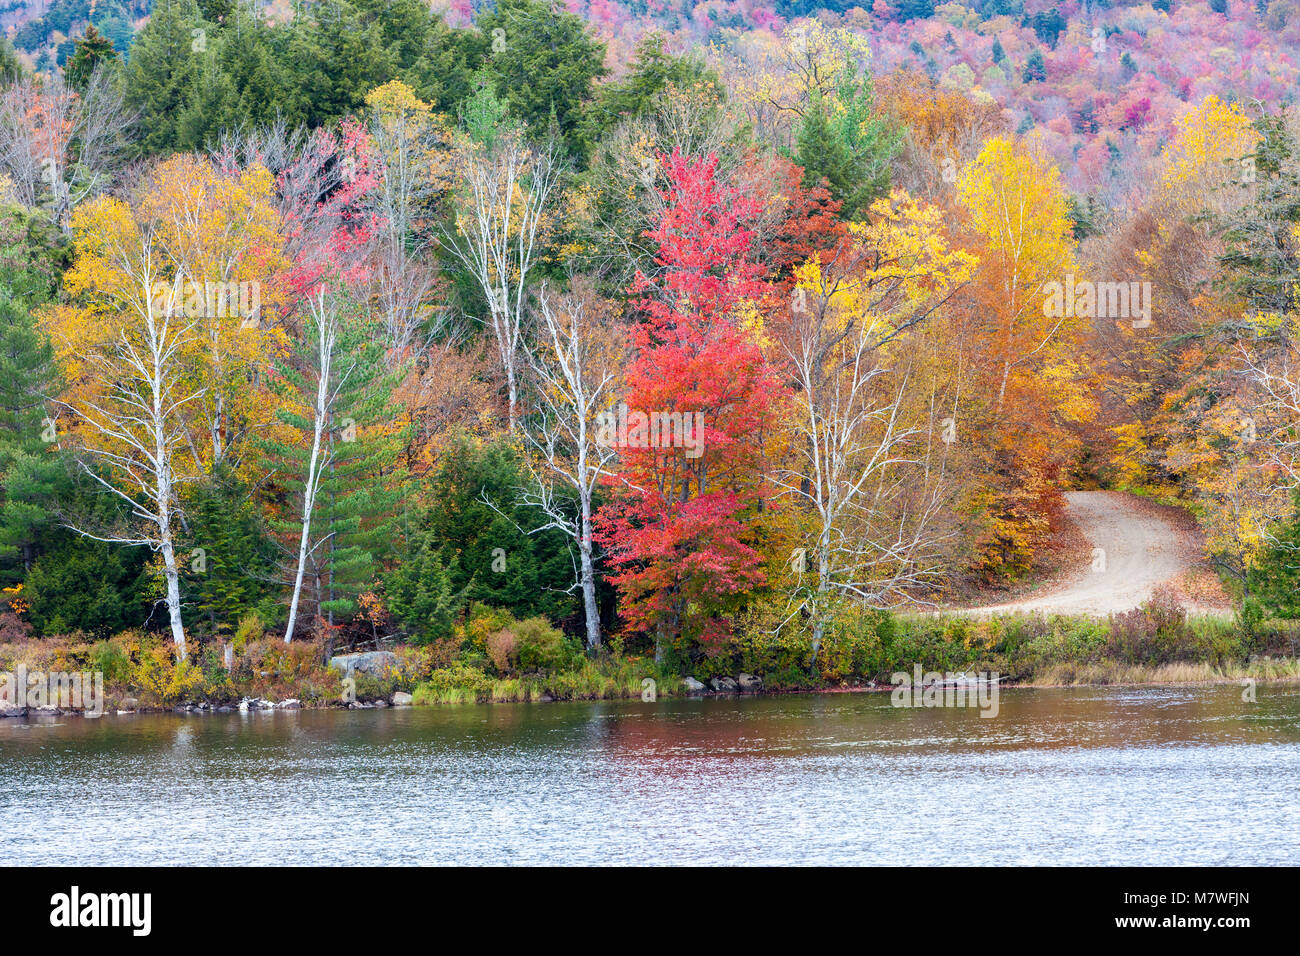 Simon Pond, Raquette River, Upper New York State, USA.  Fall Foliage Views along State Highway 30. Stock Photo